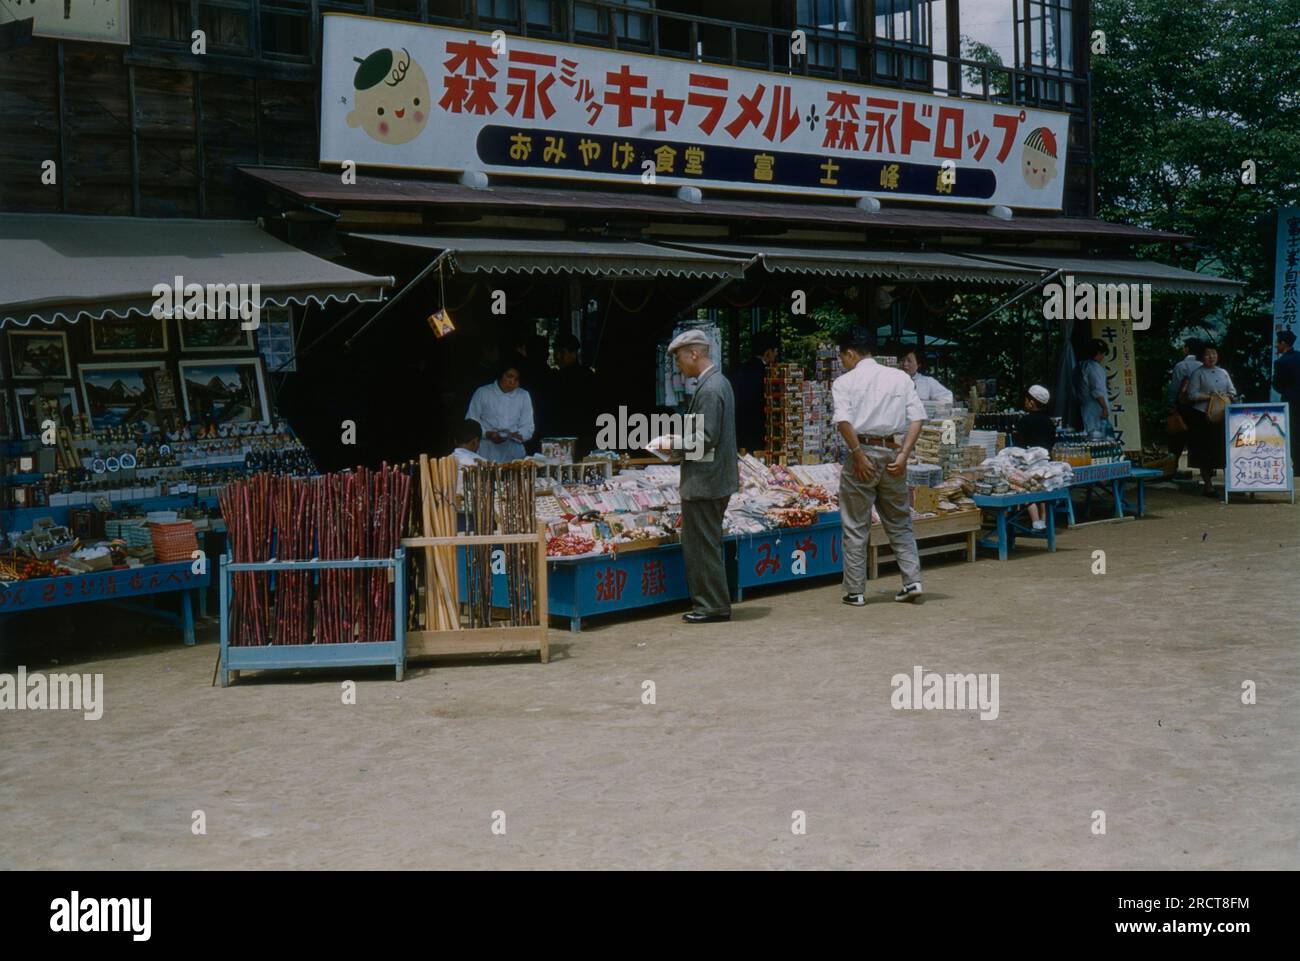 Vintage circa 1950 photograph, outdoor store or market probably in Tokyo, Japan. Sign for Morinaga caramels and candies. SOURCE: 35MM TRANSPARENCY Stock Photo